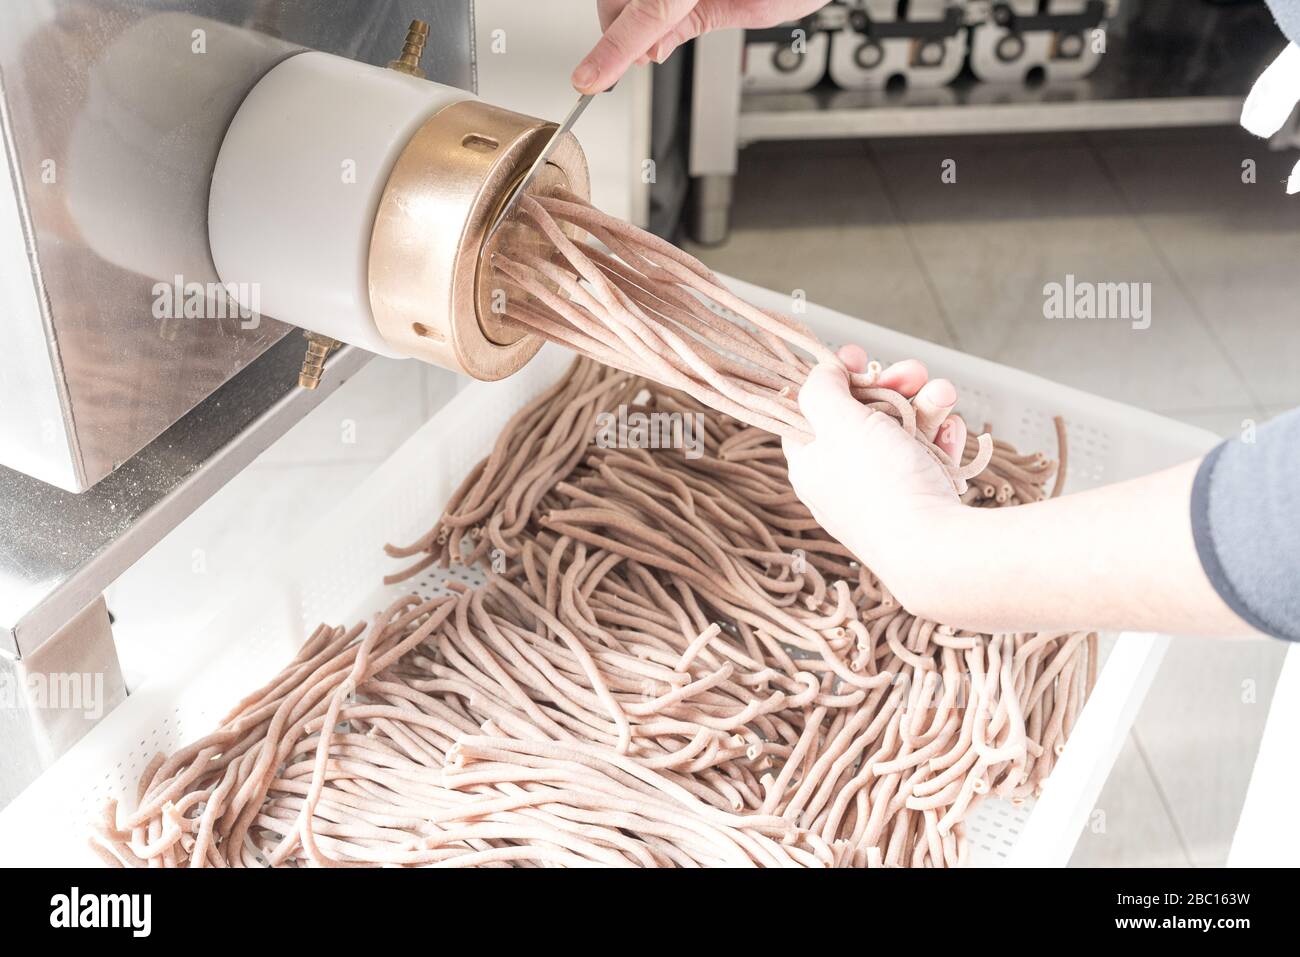 https://c8.alamy.com/comp/2BC163W/fresh-pasta-production-of-bucatini-with-wholemeal-semolina-flour-drawing-machine-and-cook-at-work-bright-filter-2BC163W.jpg